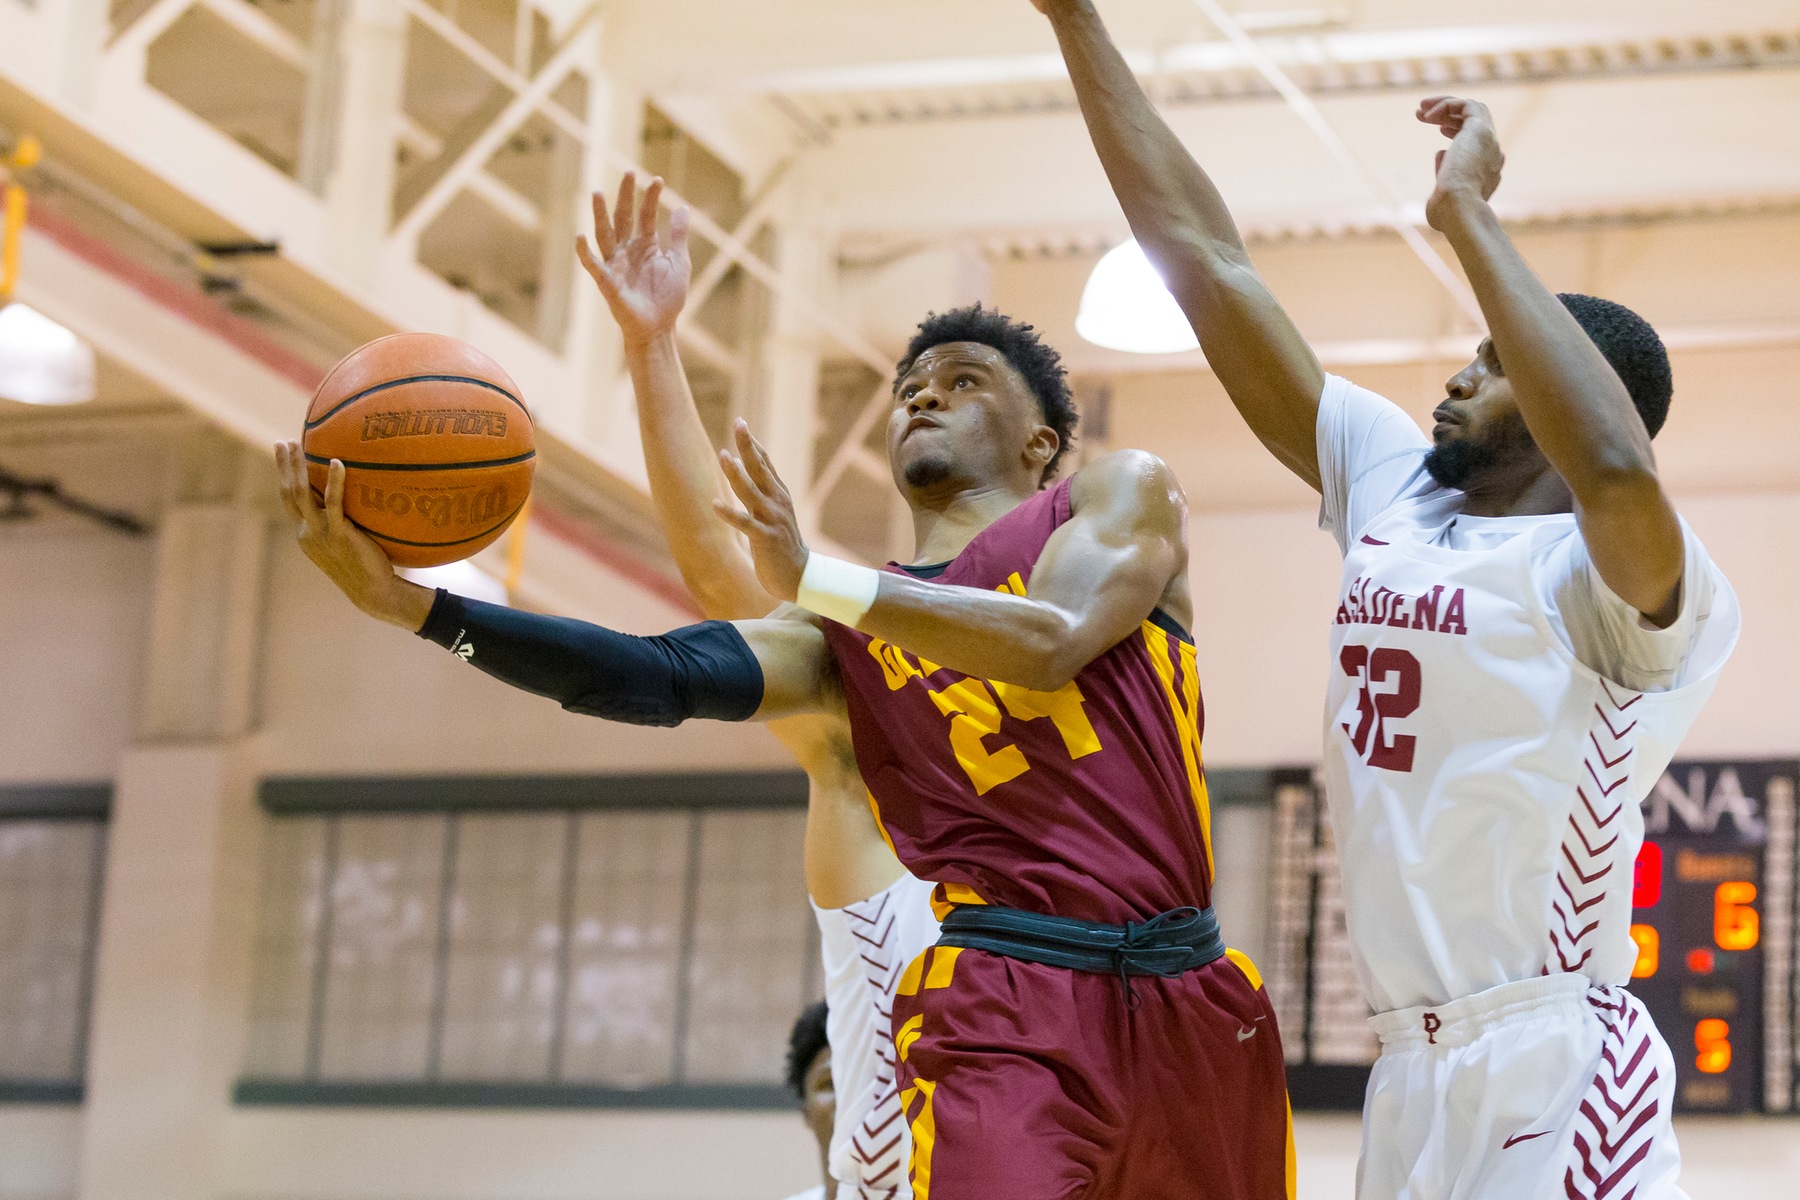 GCC Men's Basketball trying to gain footing after slow start this season